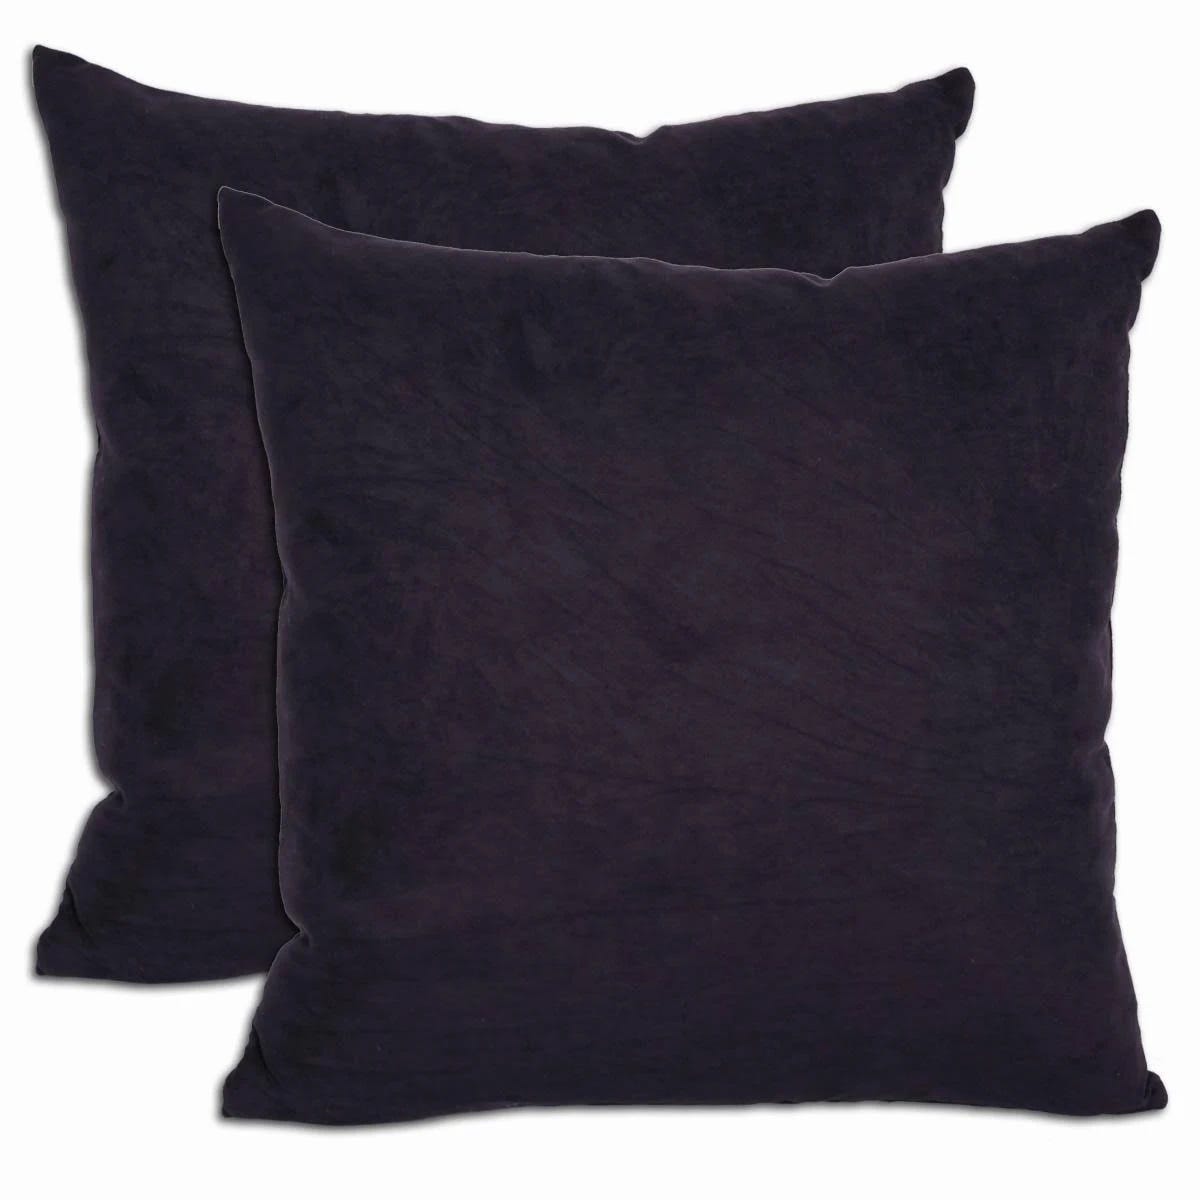 Luxury Black MicroSuede Feather and Down Throw Pillows Set | Image